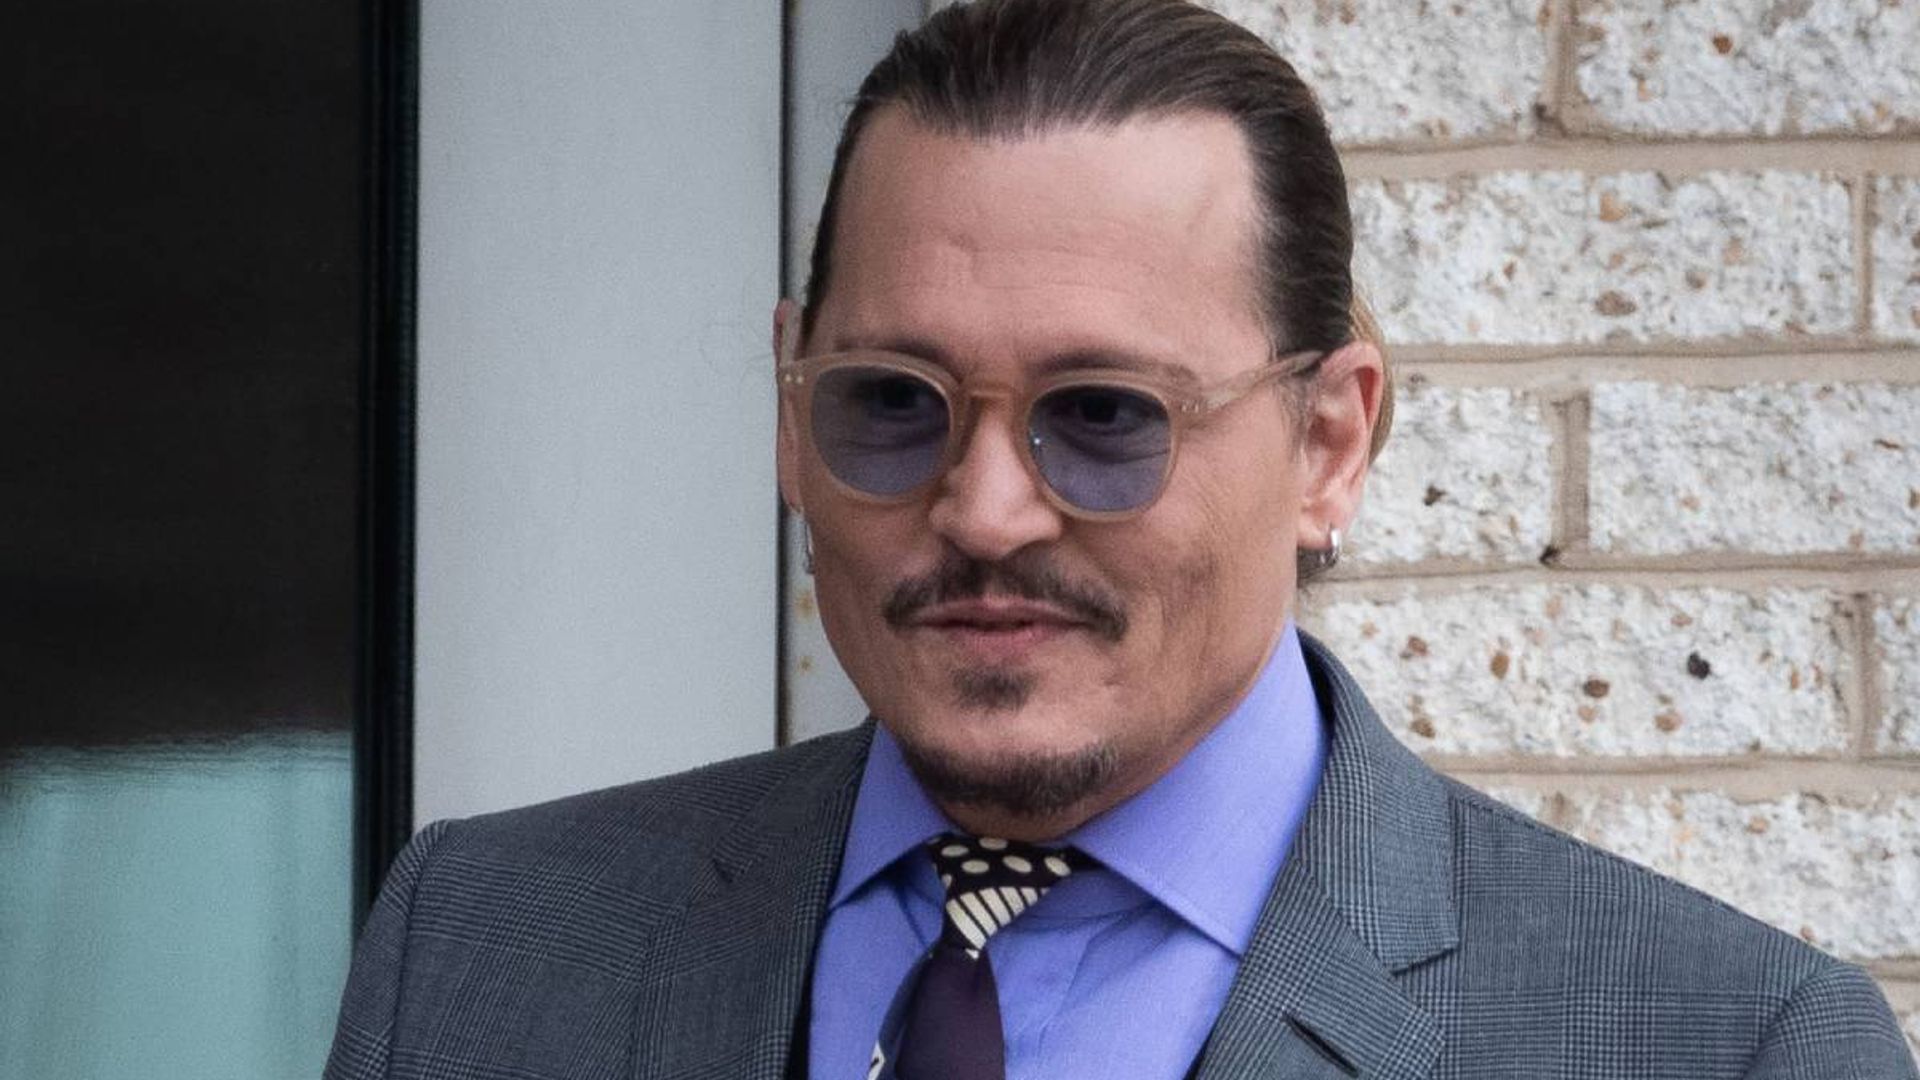 Johnny Depp's surprising engagement story to iconic actress revealed - details